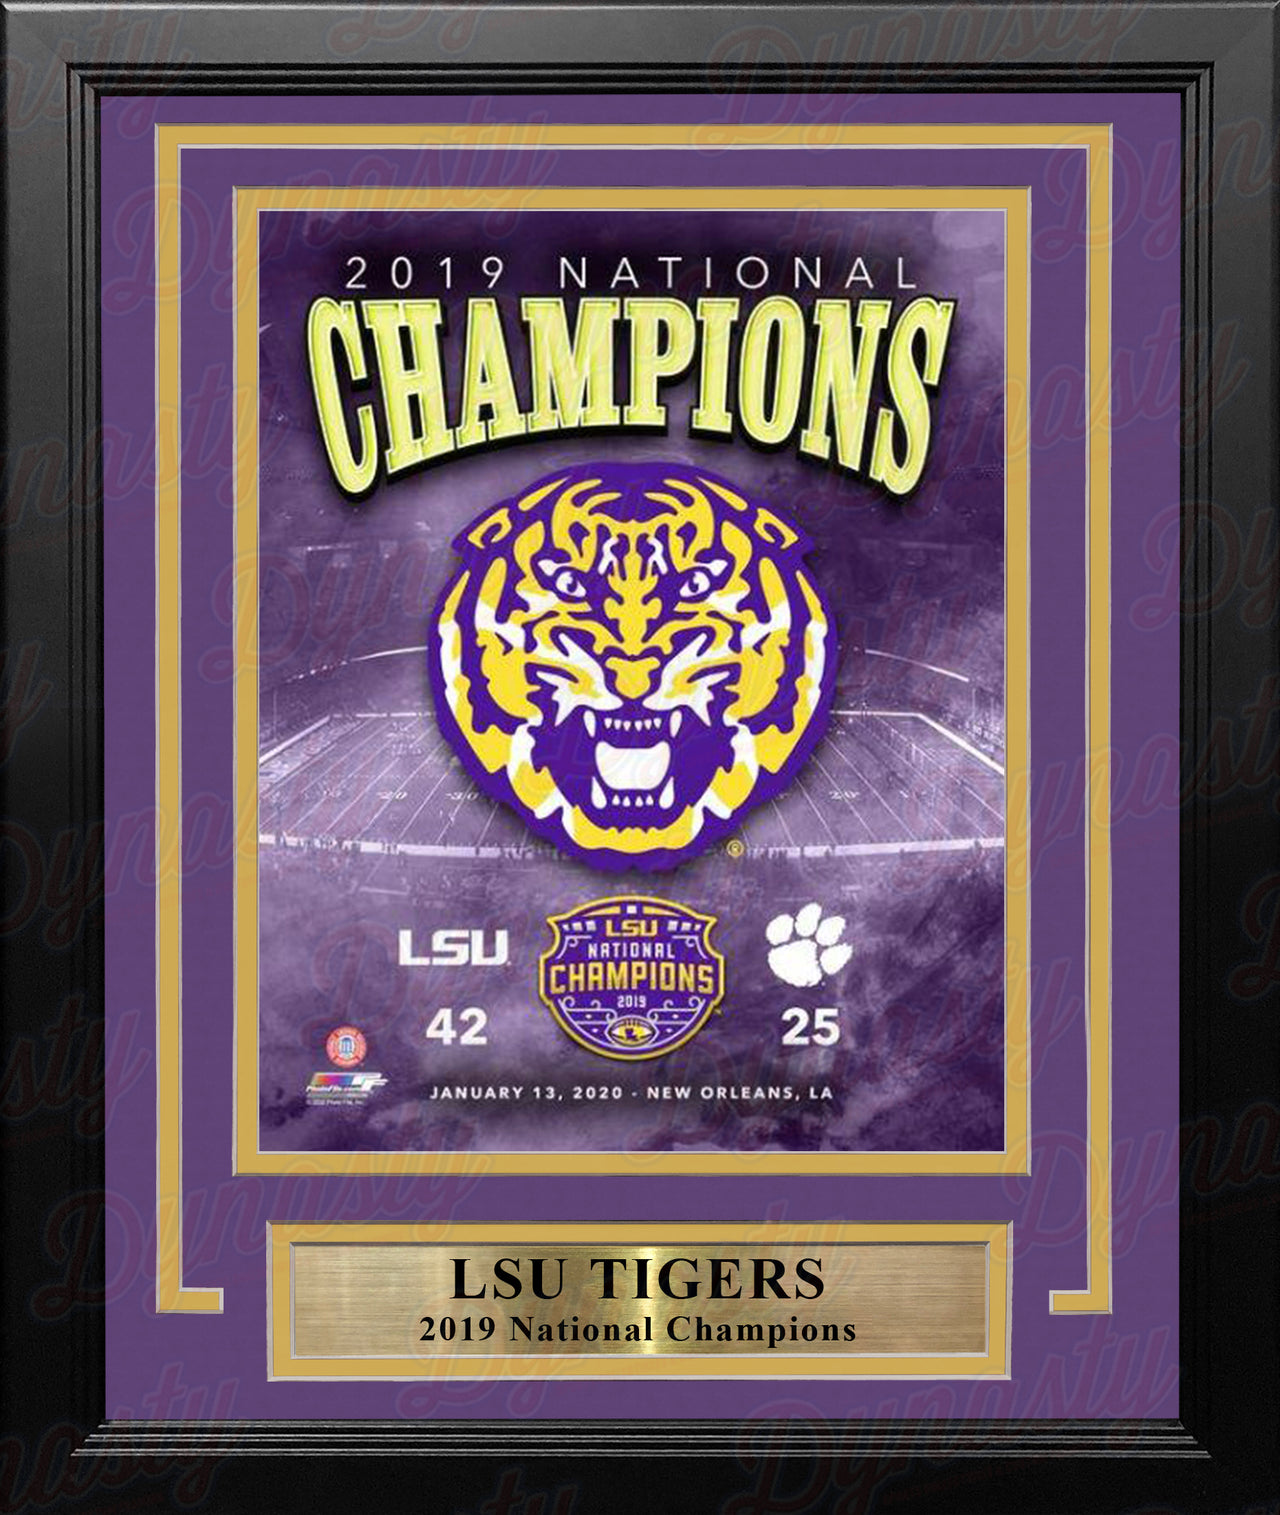 LSU Tigers 2019 National Champions Logo & Score 8" x 10" Framed College Football Photo - Dynasty Sports & Framing 